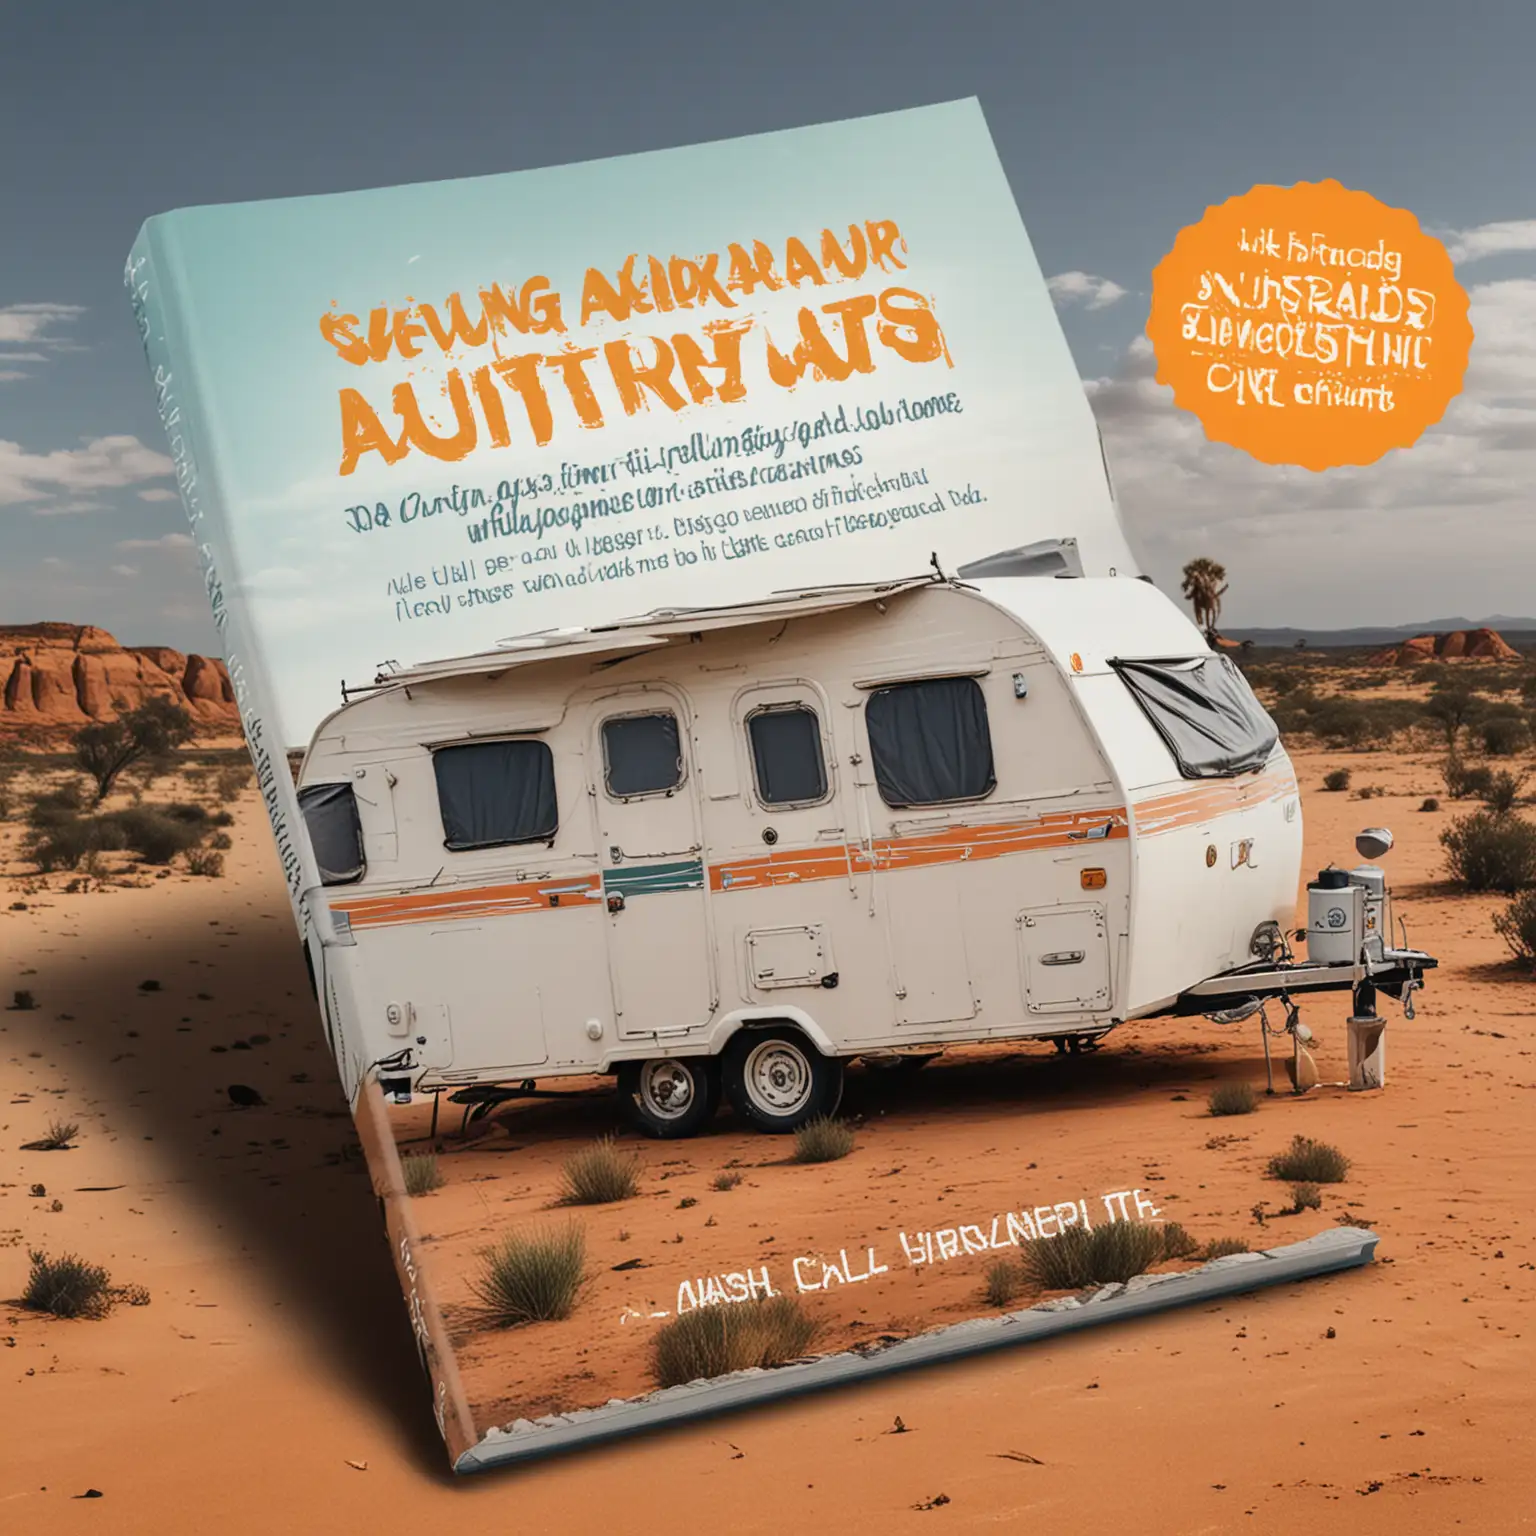 design a cover for a book about quitting your job, travelling fulltime around australia in a caravan while also creating passive income streams